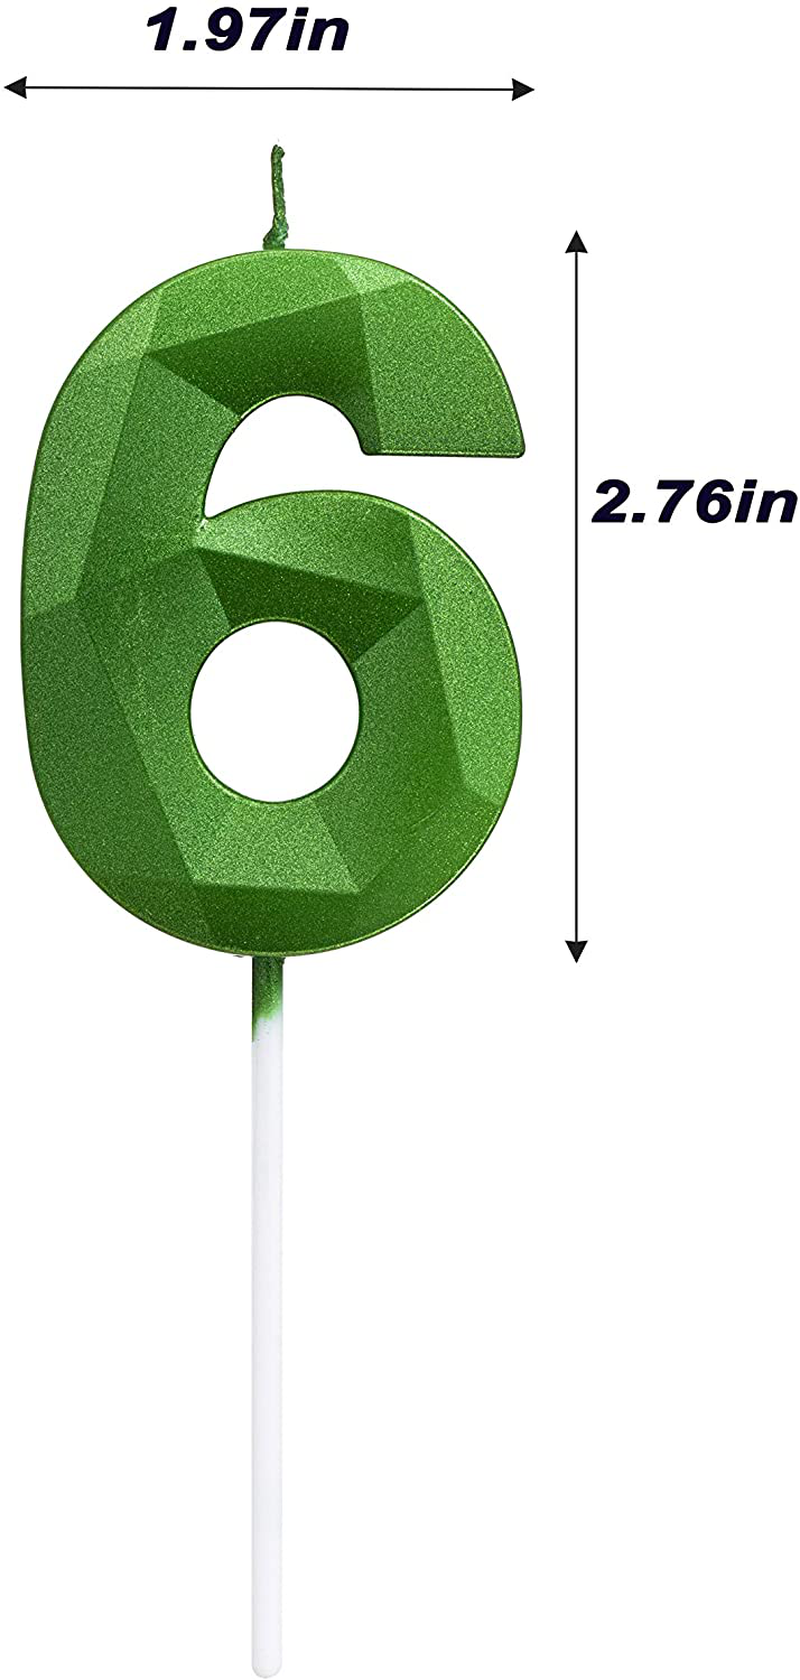 Green Happy Birthday Cake Candles,Wedding Cake Number Candles,3D Design Cake Topper Decoration for Party Kids Adults (Green Number 6)